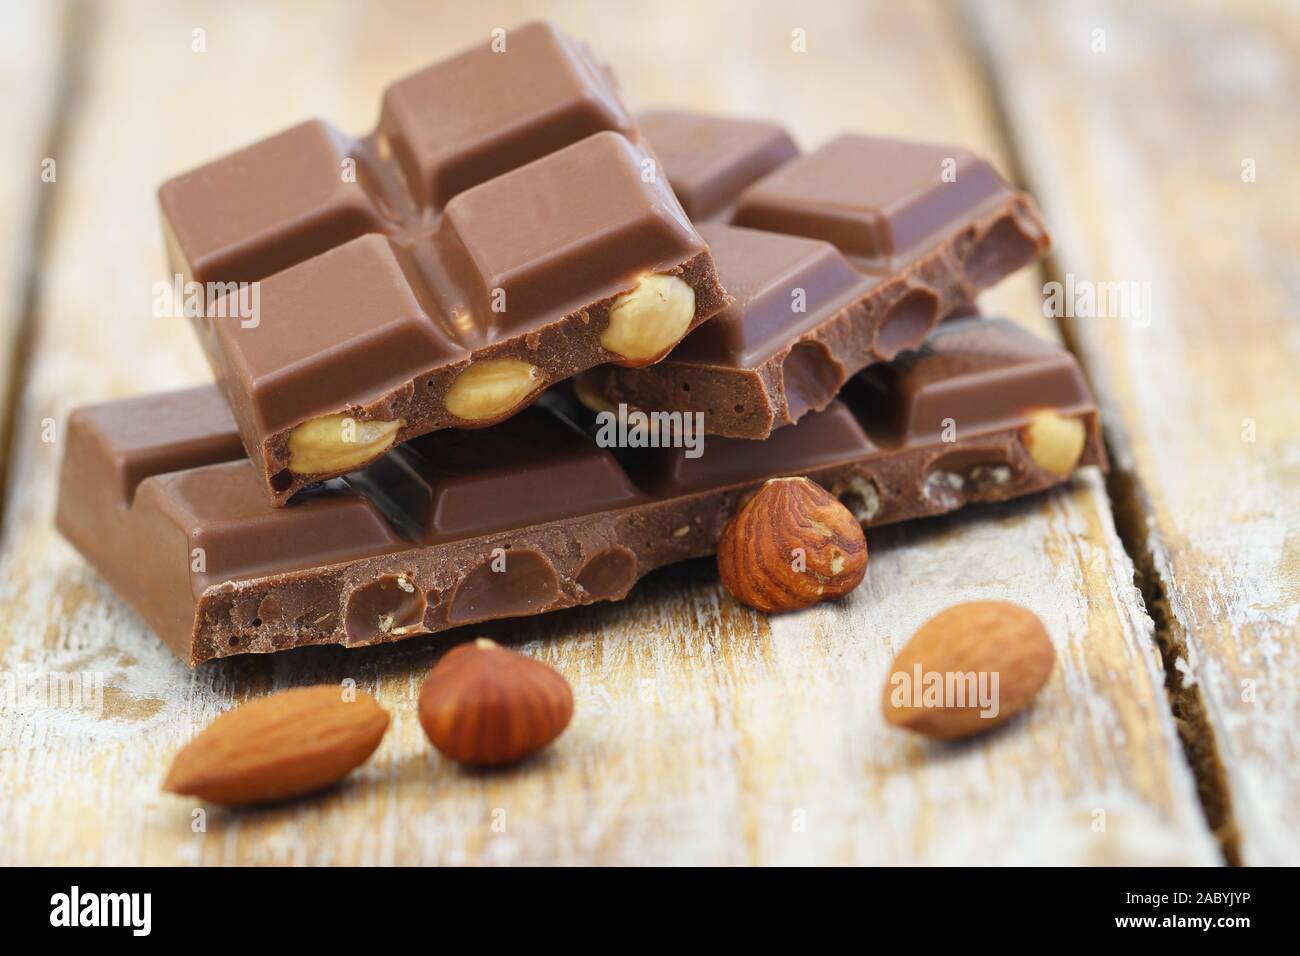 Milk chocolate pieces with whole hazelnuts and almonds on rustic wooden surface Stock Photo